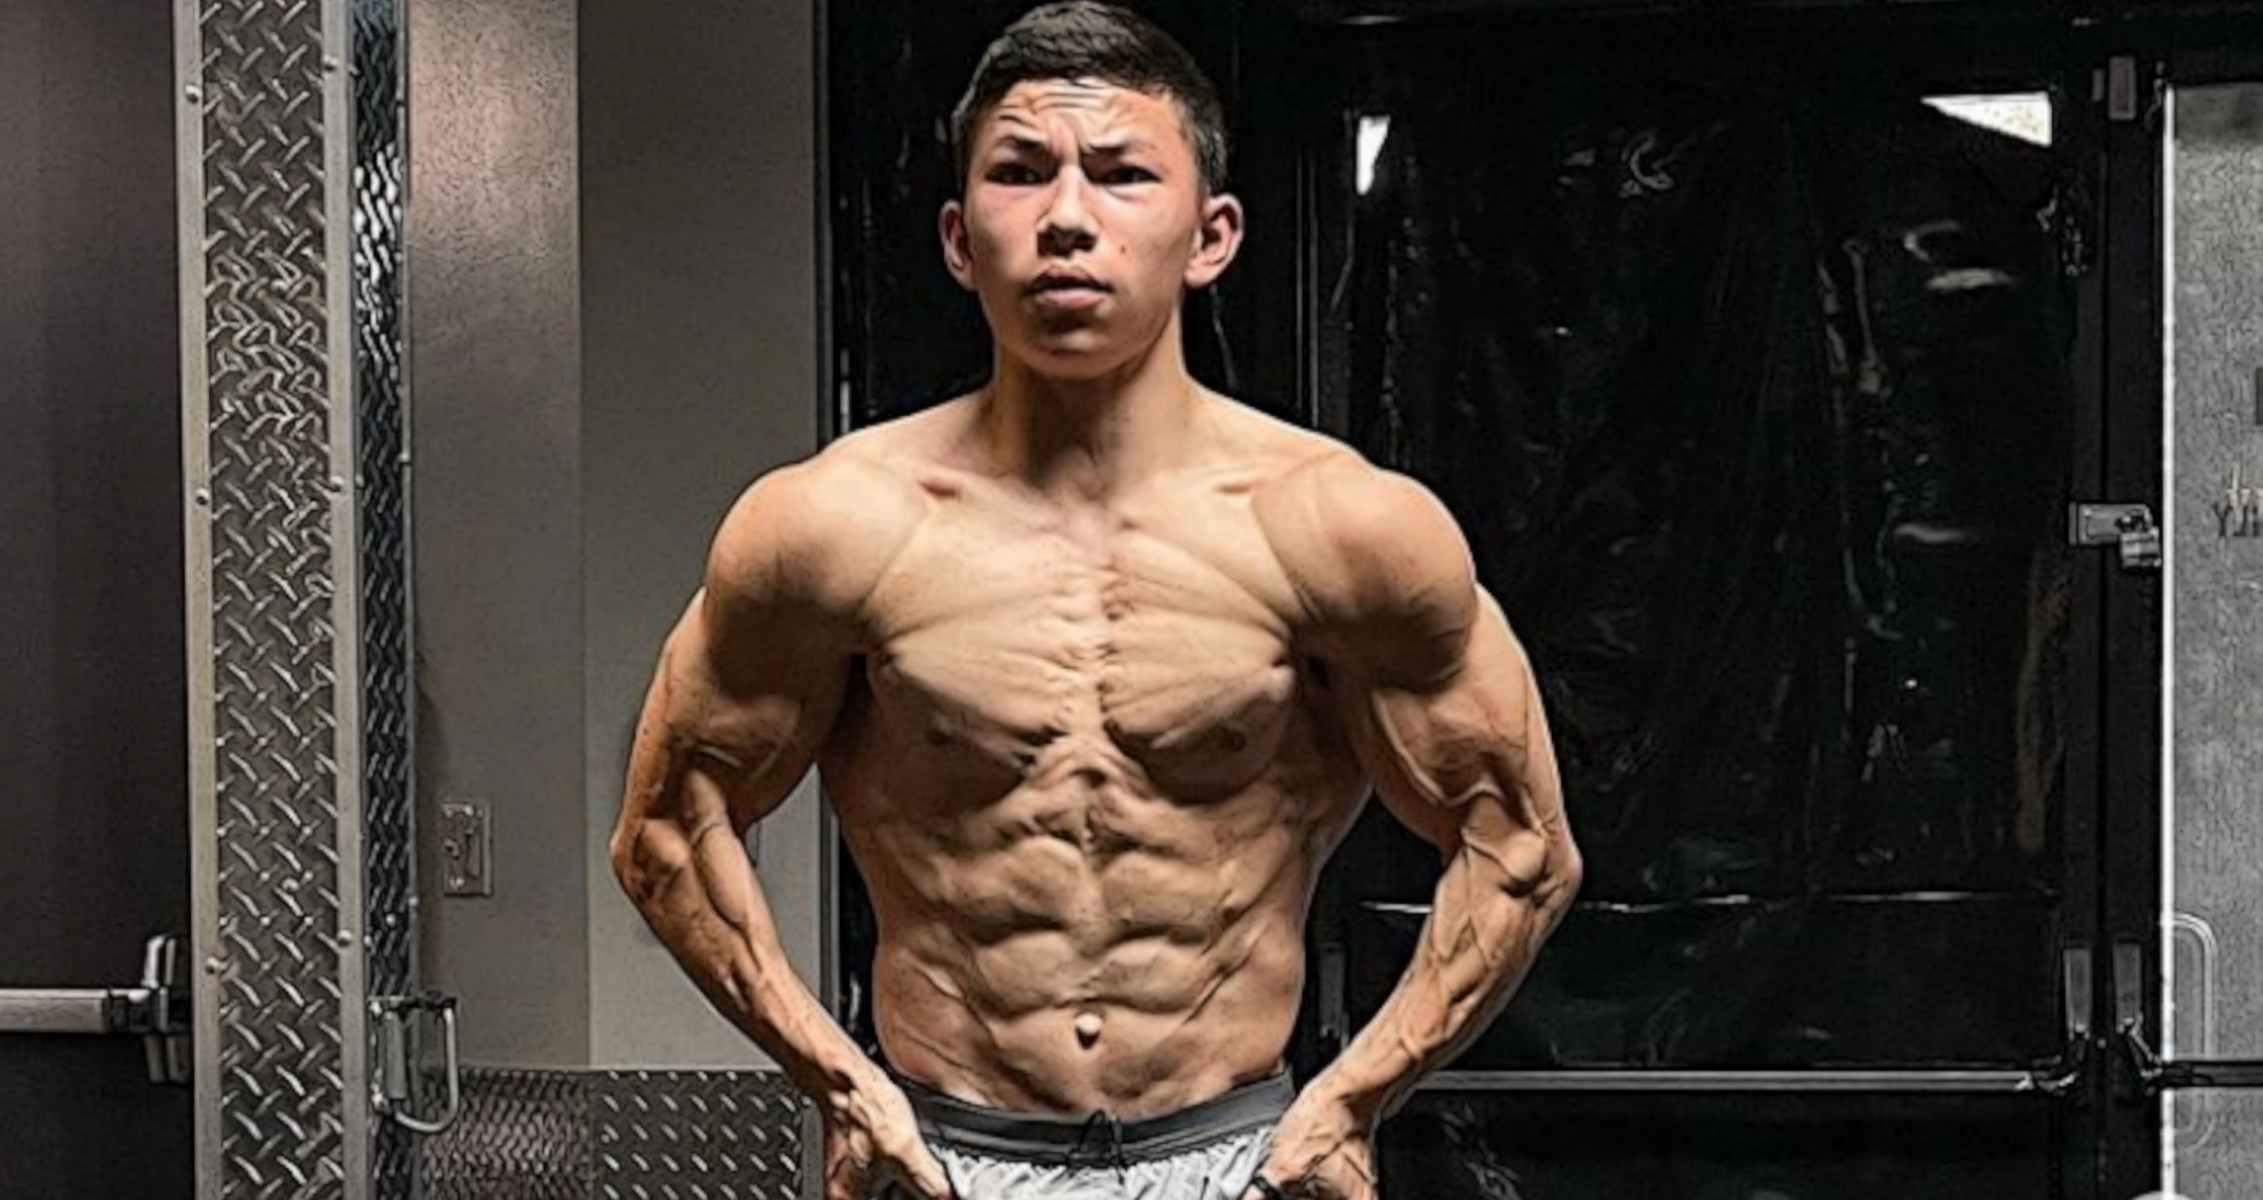 Tristyn Lee Shows Insane Conditioning 15 Weeks Out from Bodybuilding Debut